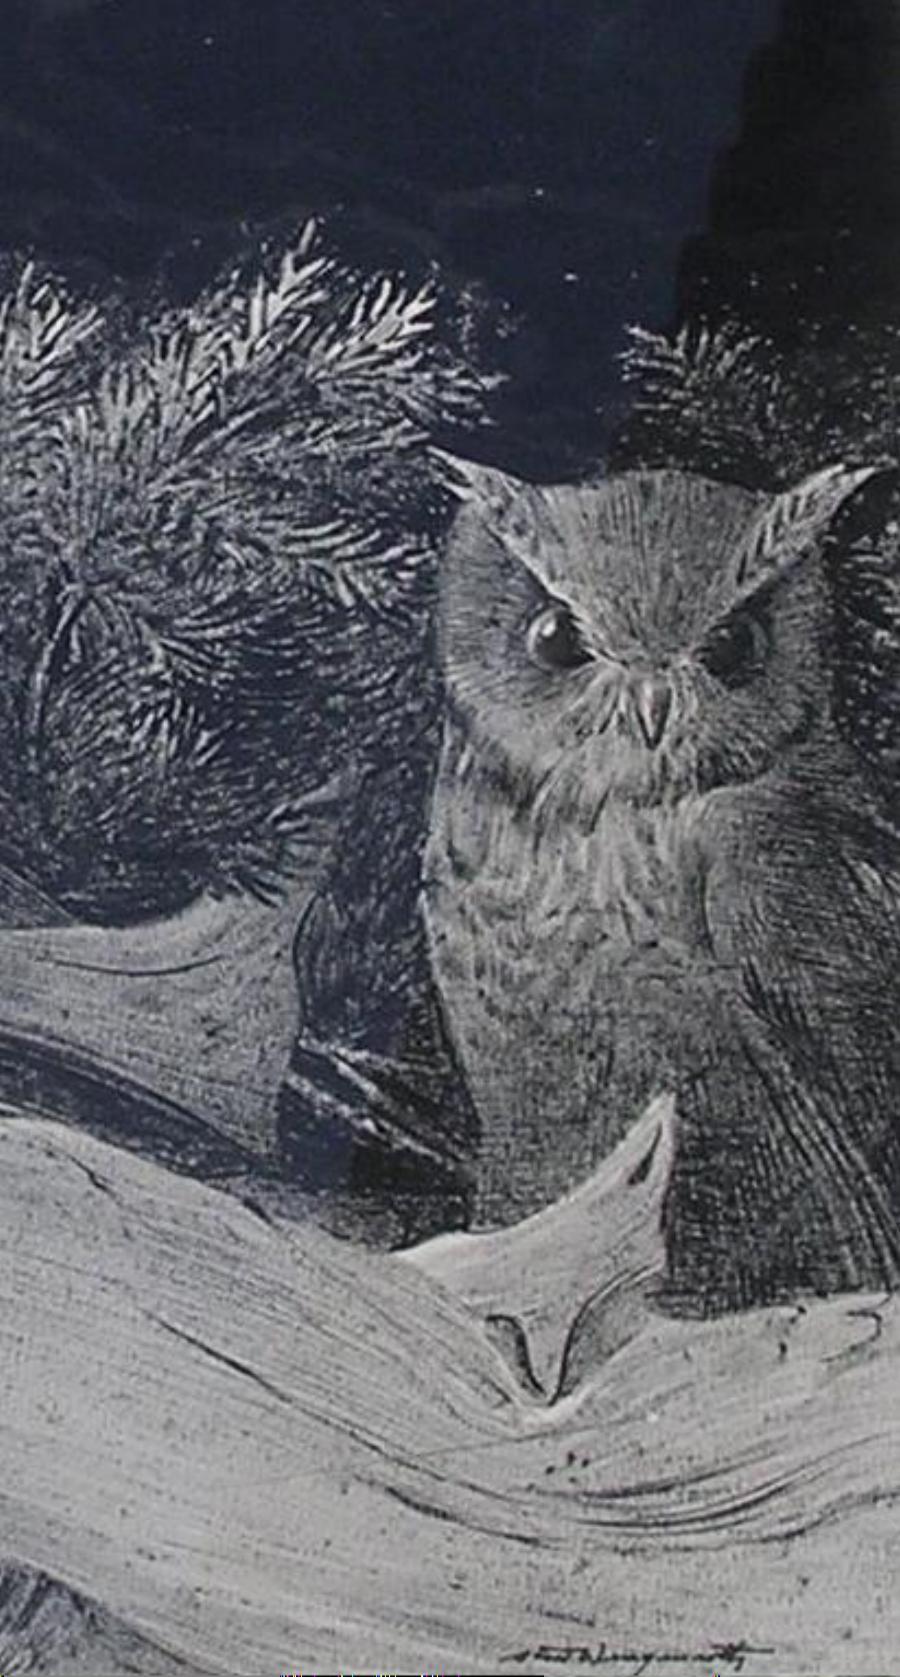 Stow Wengenroth (1906-1978) original dry brush drawing, 1966
This work is a preparatory drawing for his lithograph “The Little Owl”
Signed lower right, “Stow Wengenroth”
Image measures: 14